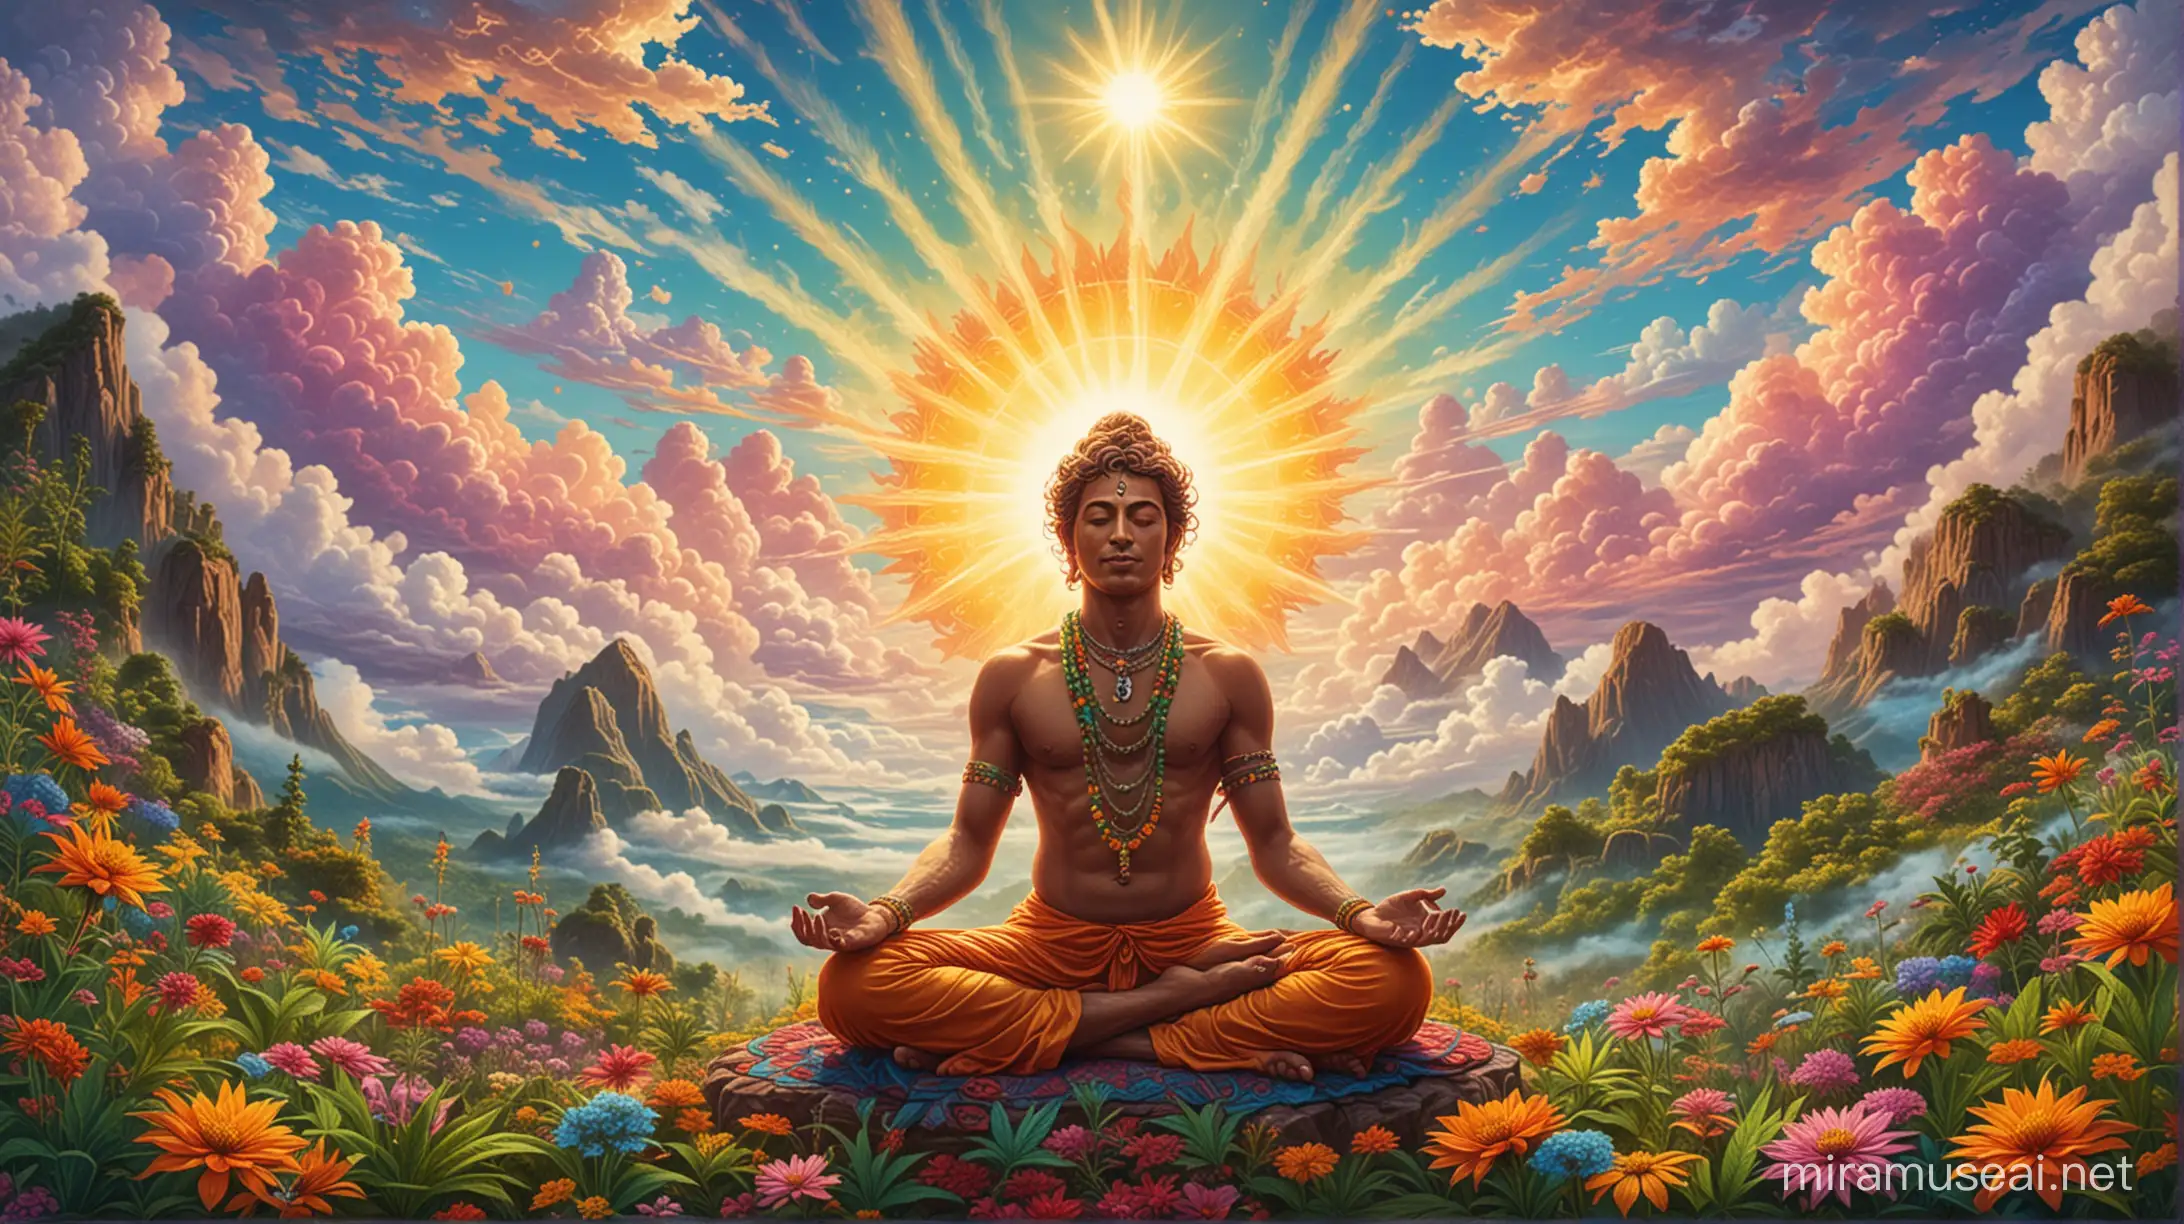 Psychedelic colors and patterns, a jungle of cannabis, flowers, bright sun, clouds, bright, vibrant colors with a shades of Siddharta meditating while seeing chakra points in his body